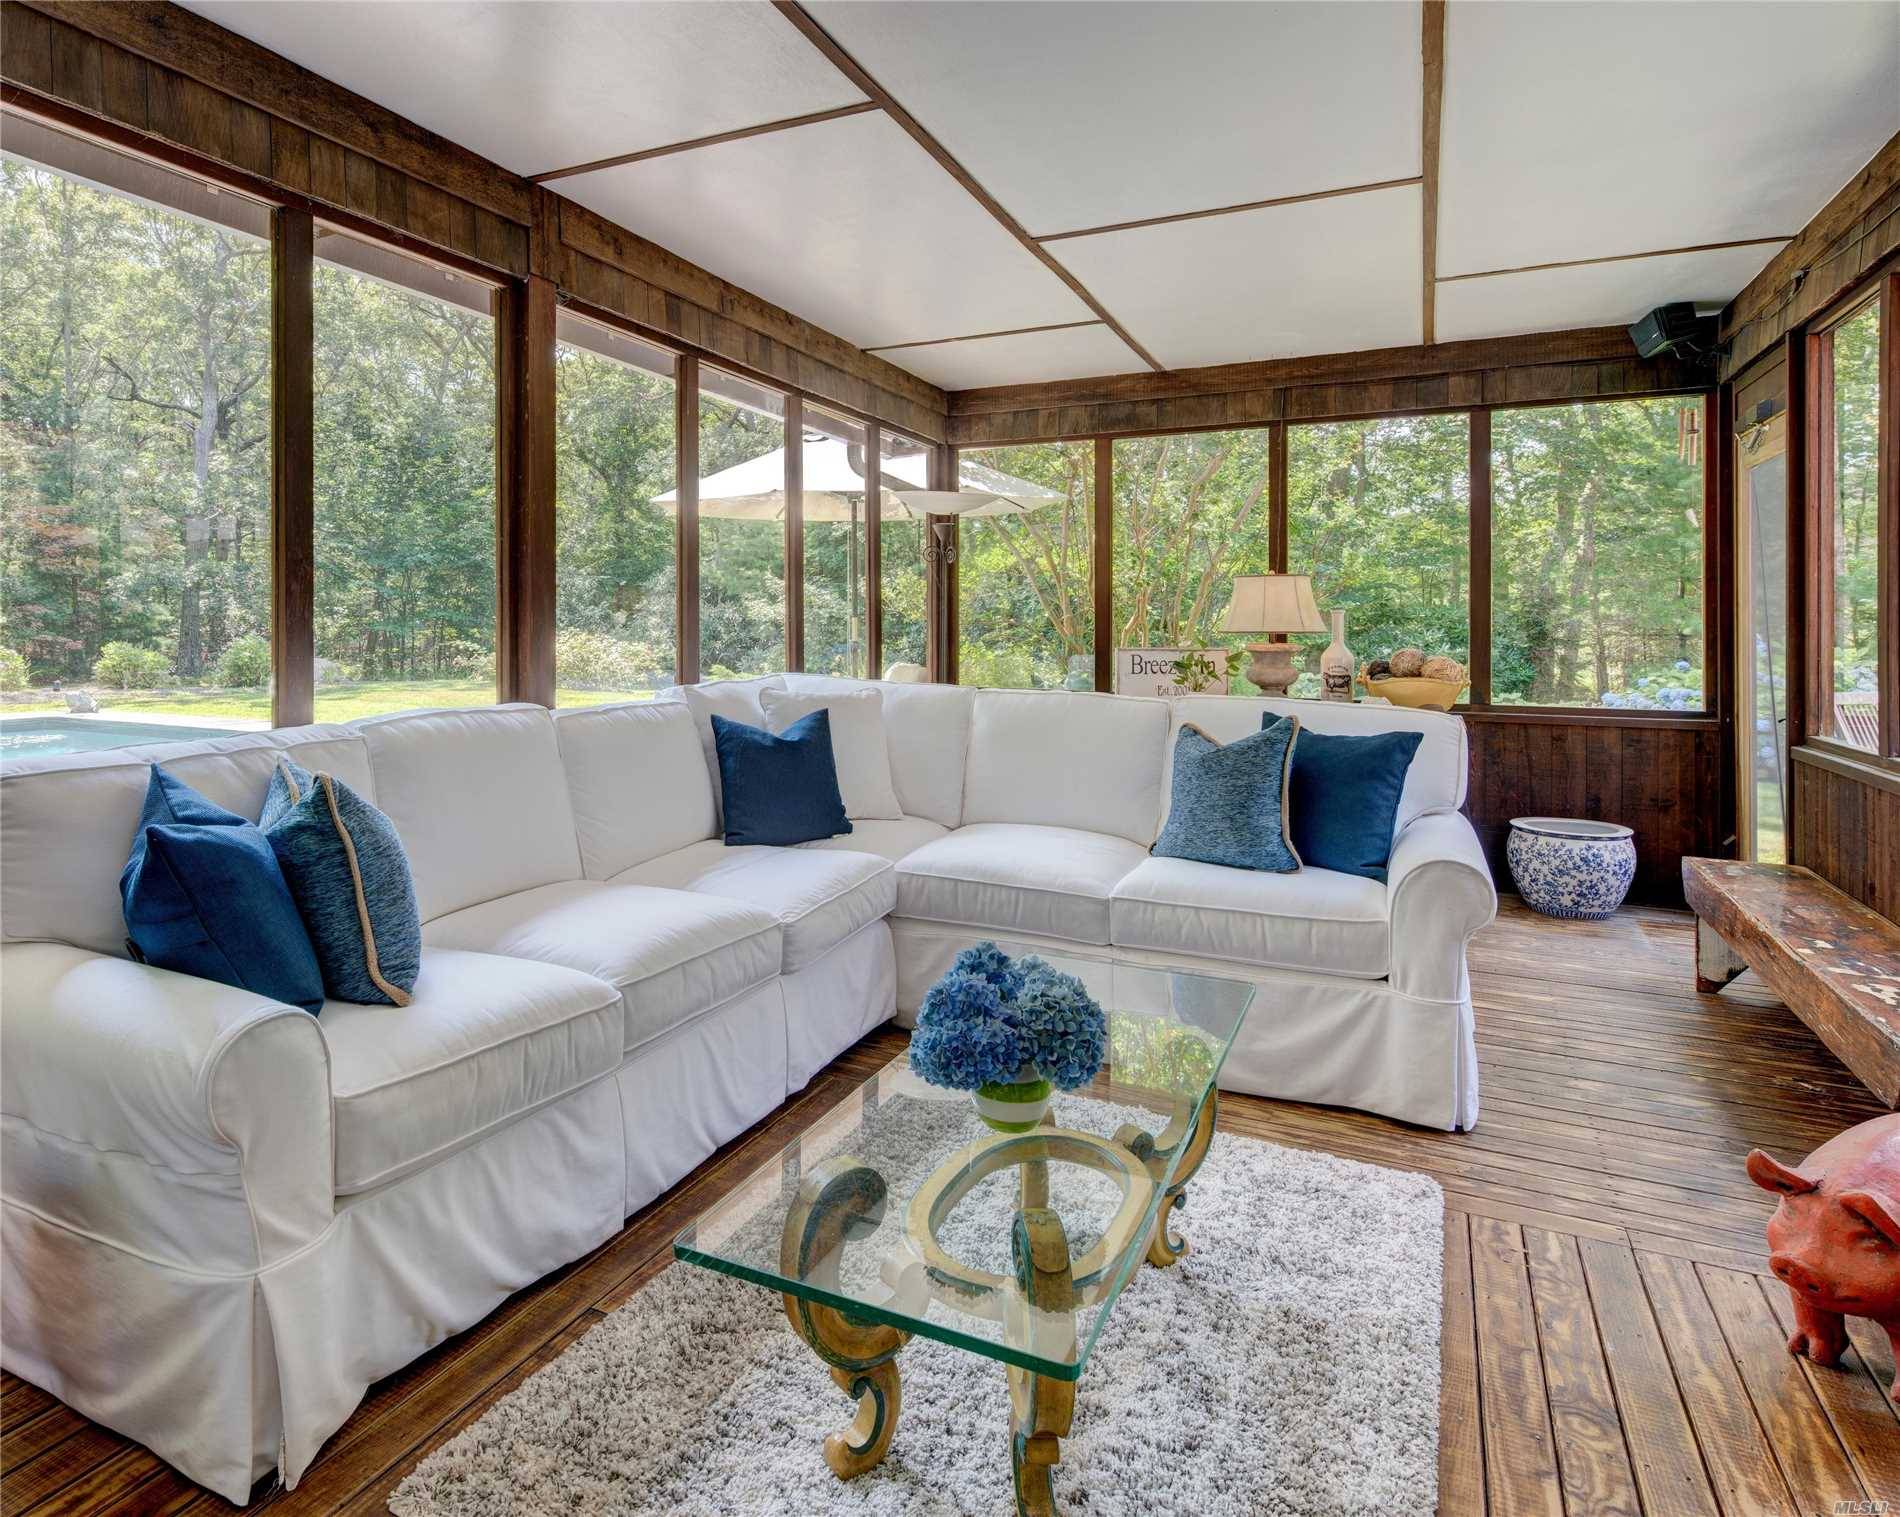 EAST HAMPTON HOME WITH POOL FOR SALE Warm and inviting three bedroom, two and one half bath, situated on a beautifully landscaped 1 acre with a sparkling pool.